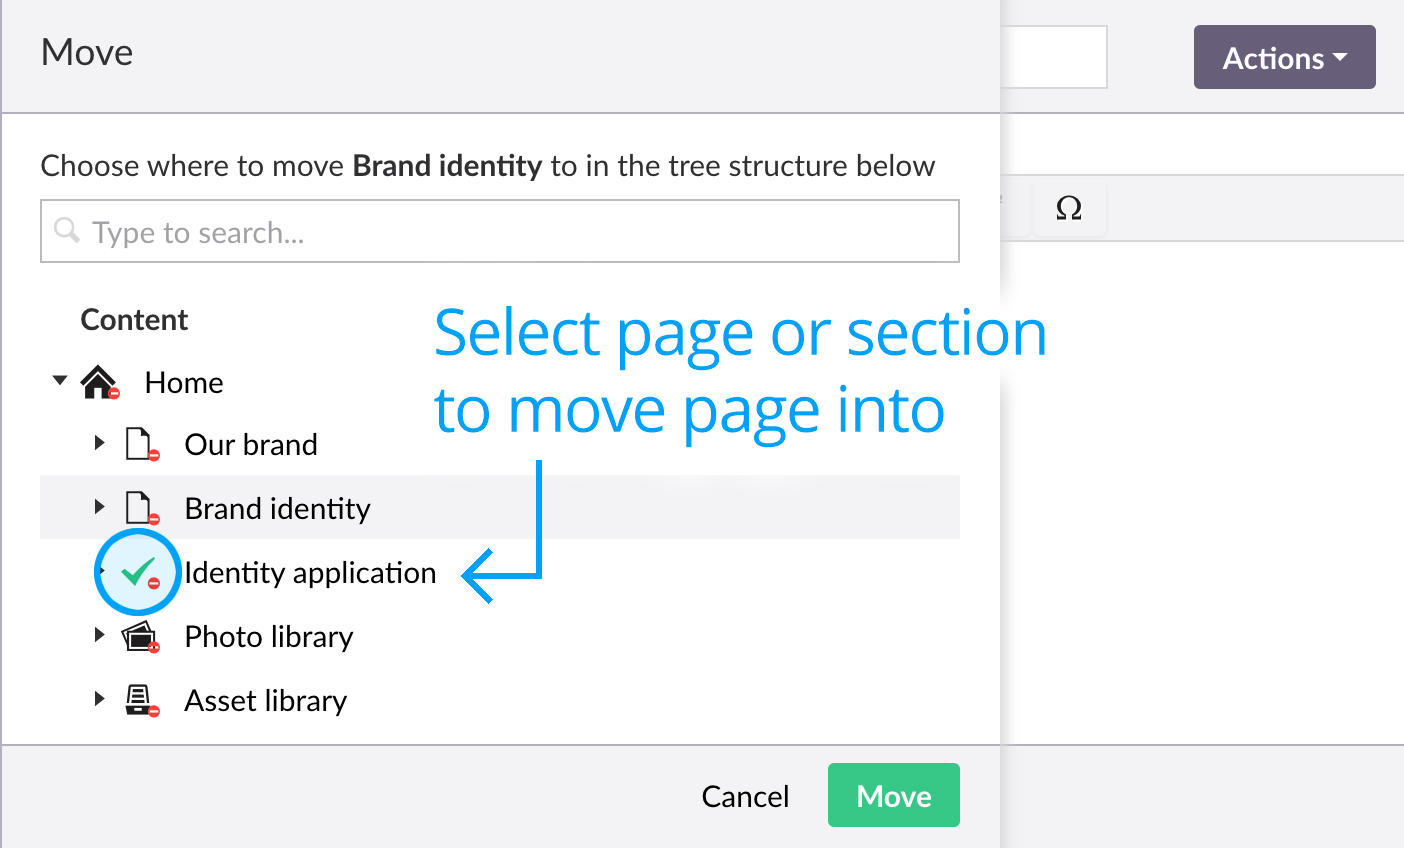 Moving pages - Select page destination